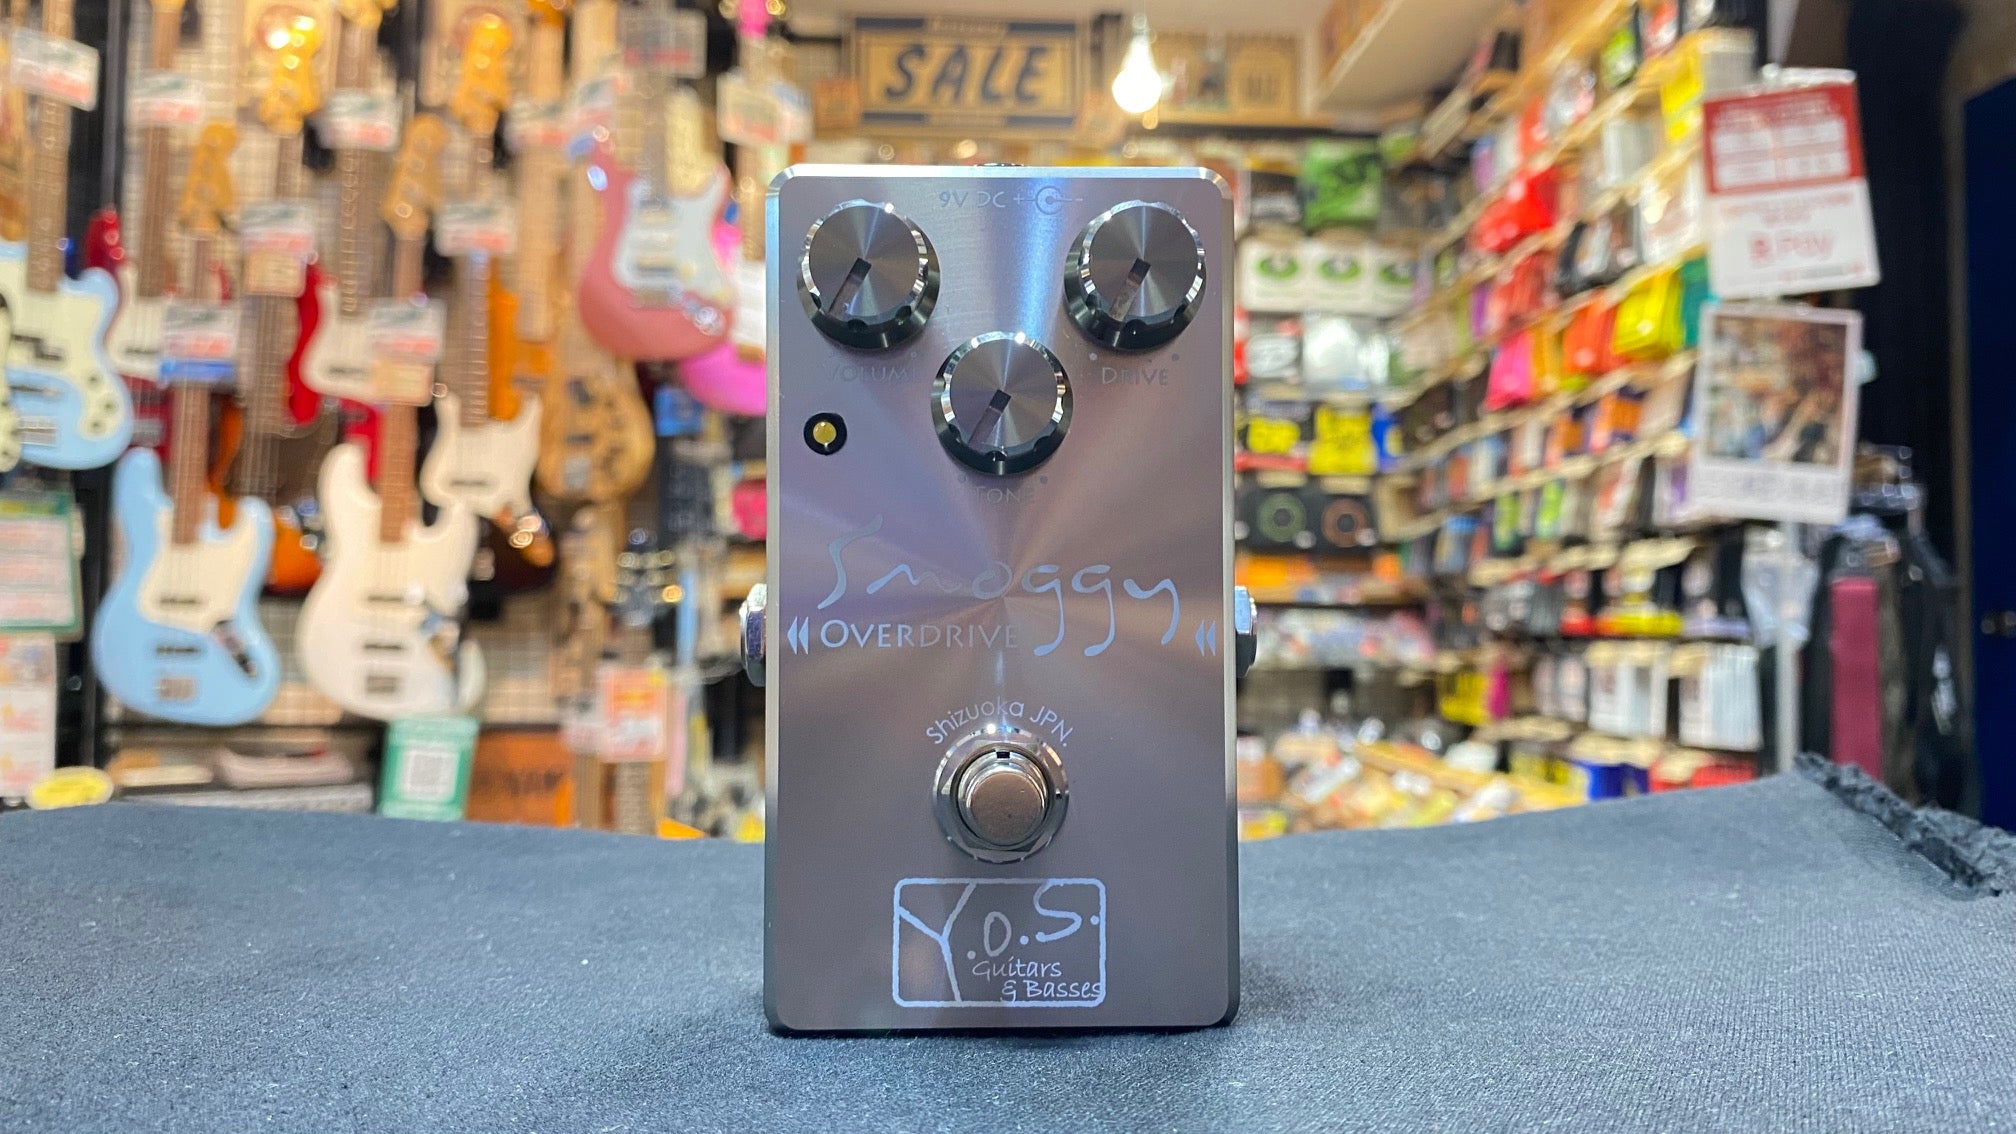 Y.O.S.ギター工房 smoggy overdrive シリアル300番台 - エフェクター